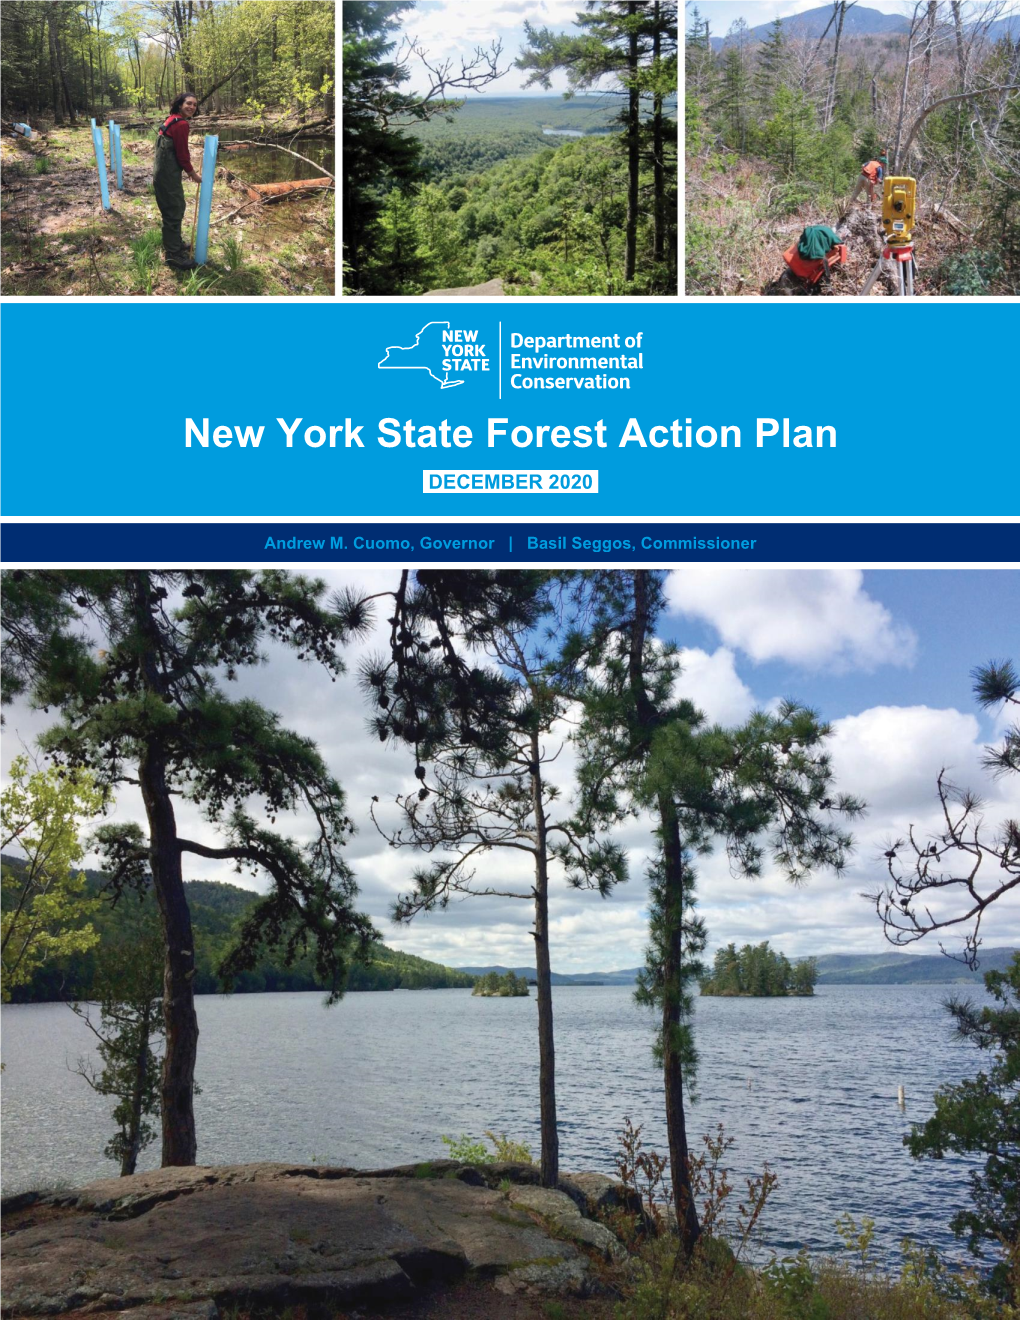 New York State Forest Action Plan DECEMBER 2020